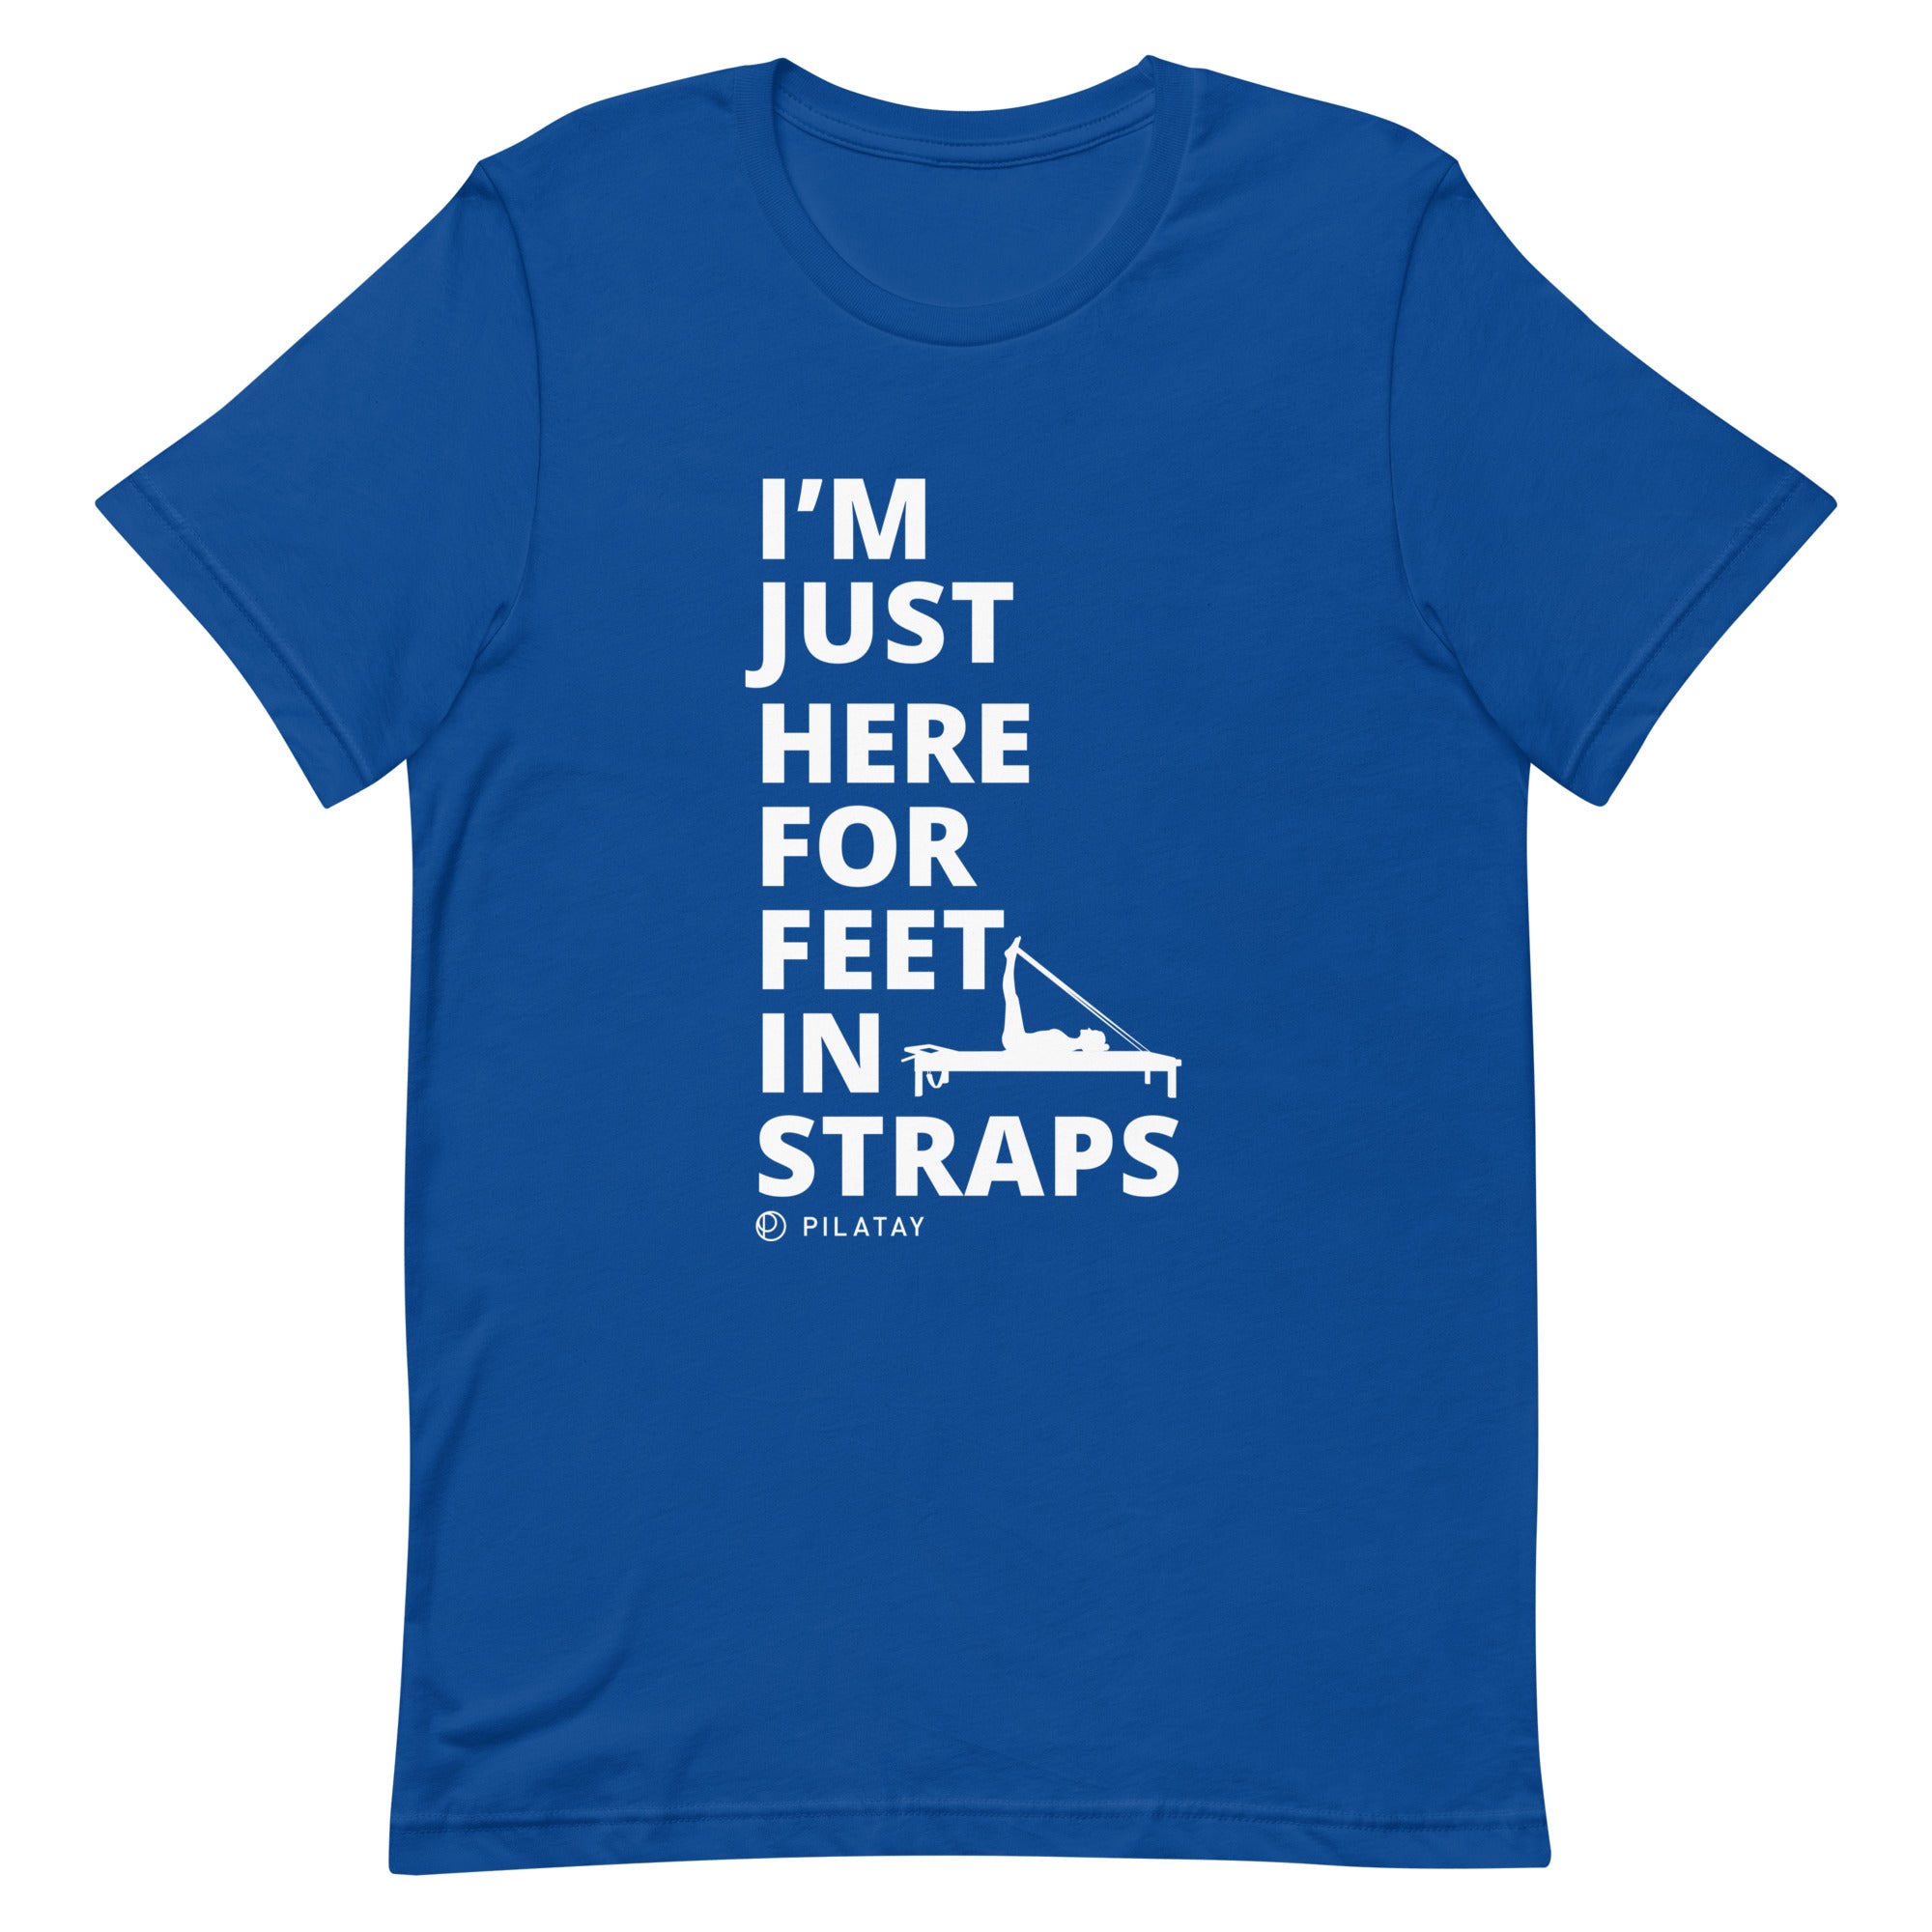 I'm Just Here For Feet In Straps - Unisex Pilates Tee – The Pilates Shop by  Pilatay